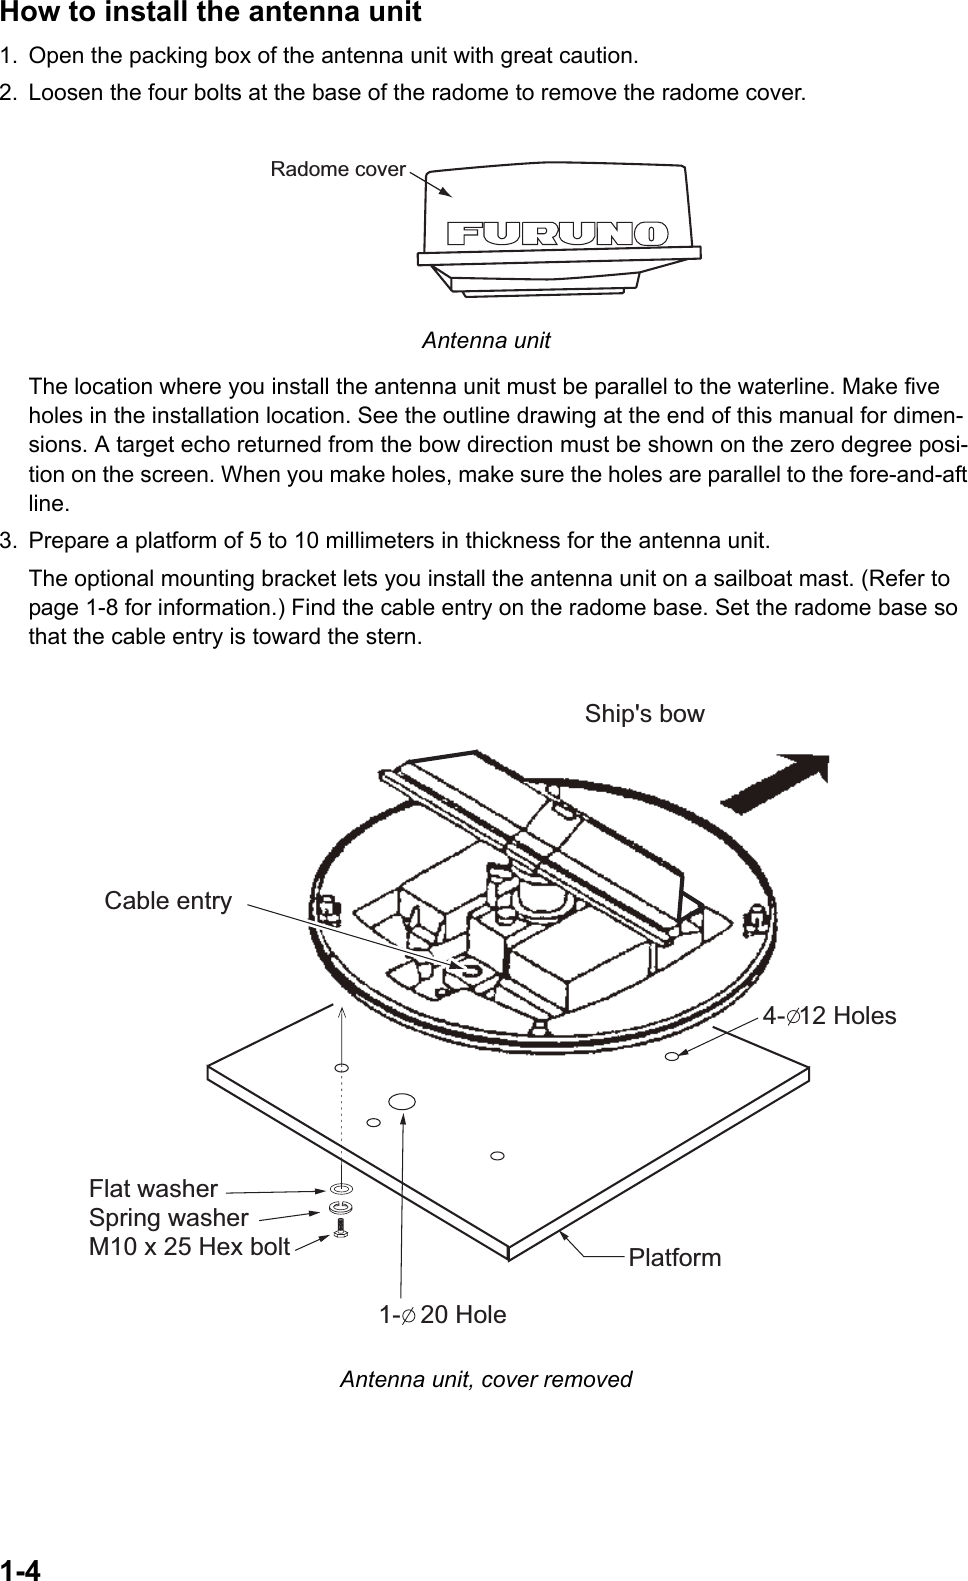 1-4How to install the antenna unit1. Open the packing box of the antenna unit with great caution.2. Loosen the four bolts at the base of the radome to remove the radome cover.Antenna unitThe location where you install the antenna unit must be parallel to the waterline. Make five holes in the installation location. See the outline drawing at the end of this manual for dimen-sions. A target echo returned from the bow direction must be shown on the zero degree posi-tion on the screen. When you make holes, make sure the holes are parallel to the fore-and-aft line.3. Prepare a platform of 5 to 10 millimeters in thickness for the antenna unit. The optional mounting bracket lets you install the antenna unit on a sailboat mast. (Refer to page 1-8 for information.) Find the cable entry on the radome base. Set the radome base so that the cable entry is toward the stern.Antenna unit, cover removedRadome coverFlat washerSpring washerM10 x 25 Hex bolt Platform4- 12 HolesShip&apos;s bow1-  20 HoleCable entry